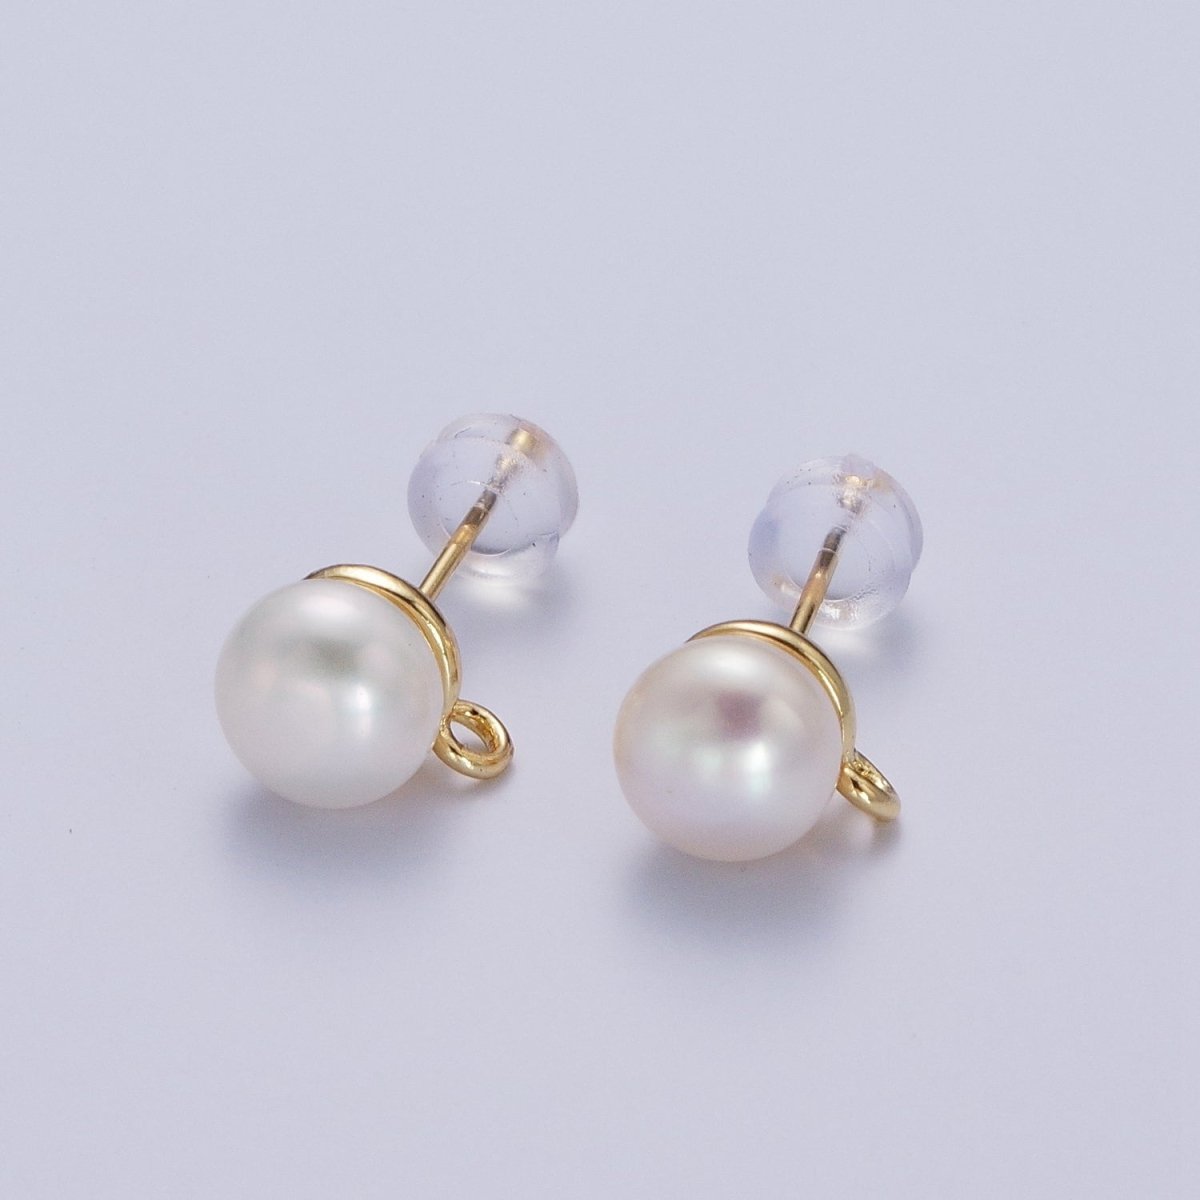 Round White Shell Pearl Gold Stud With Loop Earrings Supply Open Link Stud For Jewelry Making | K-063 - DLUXCA